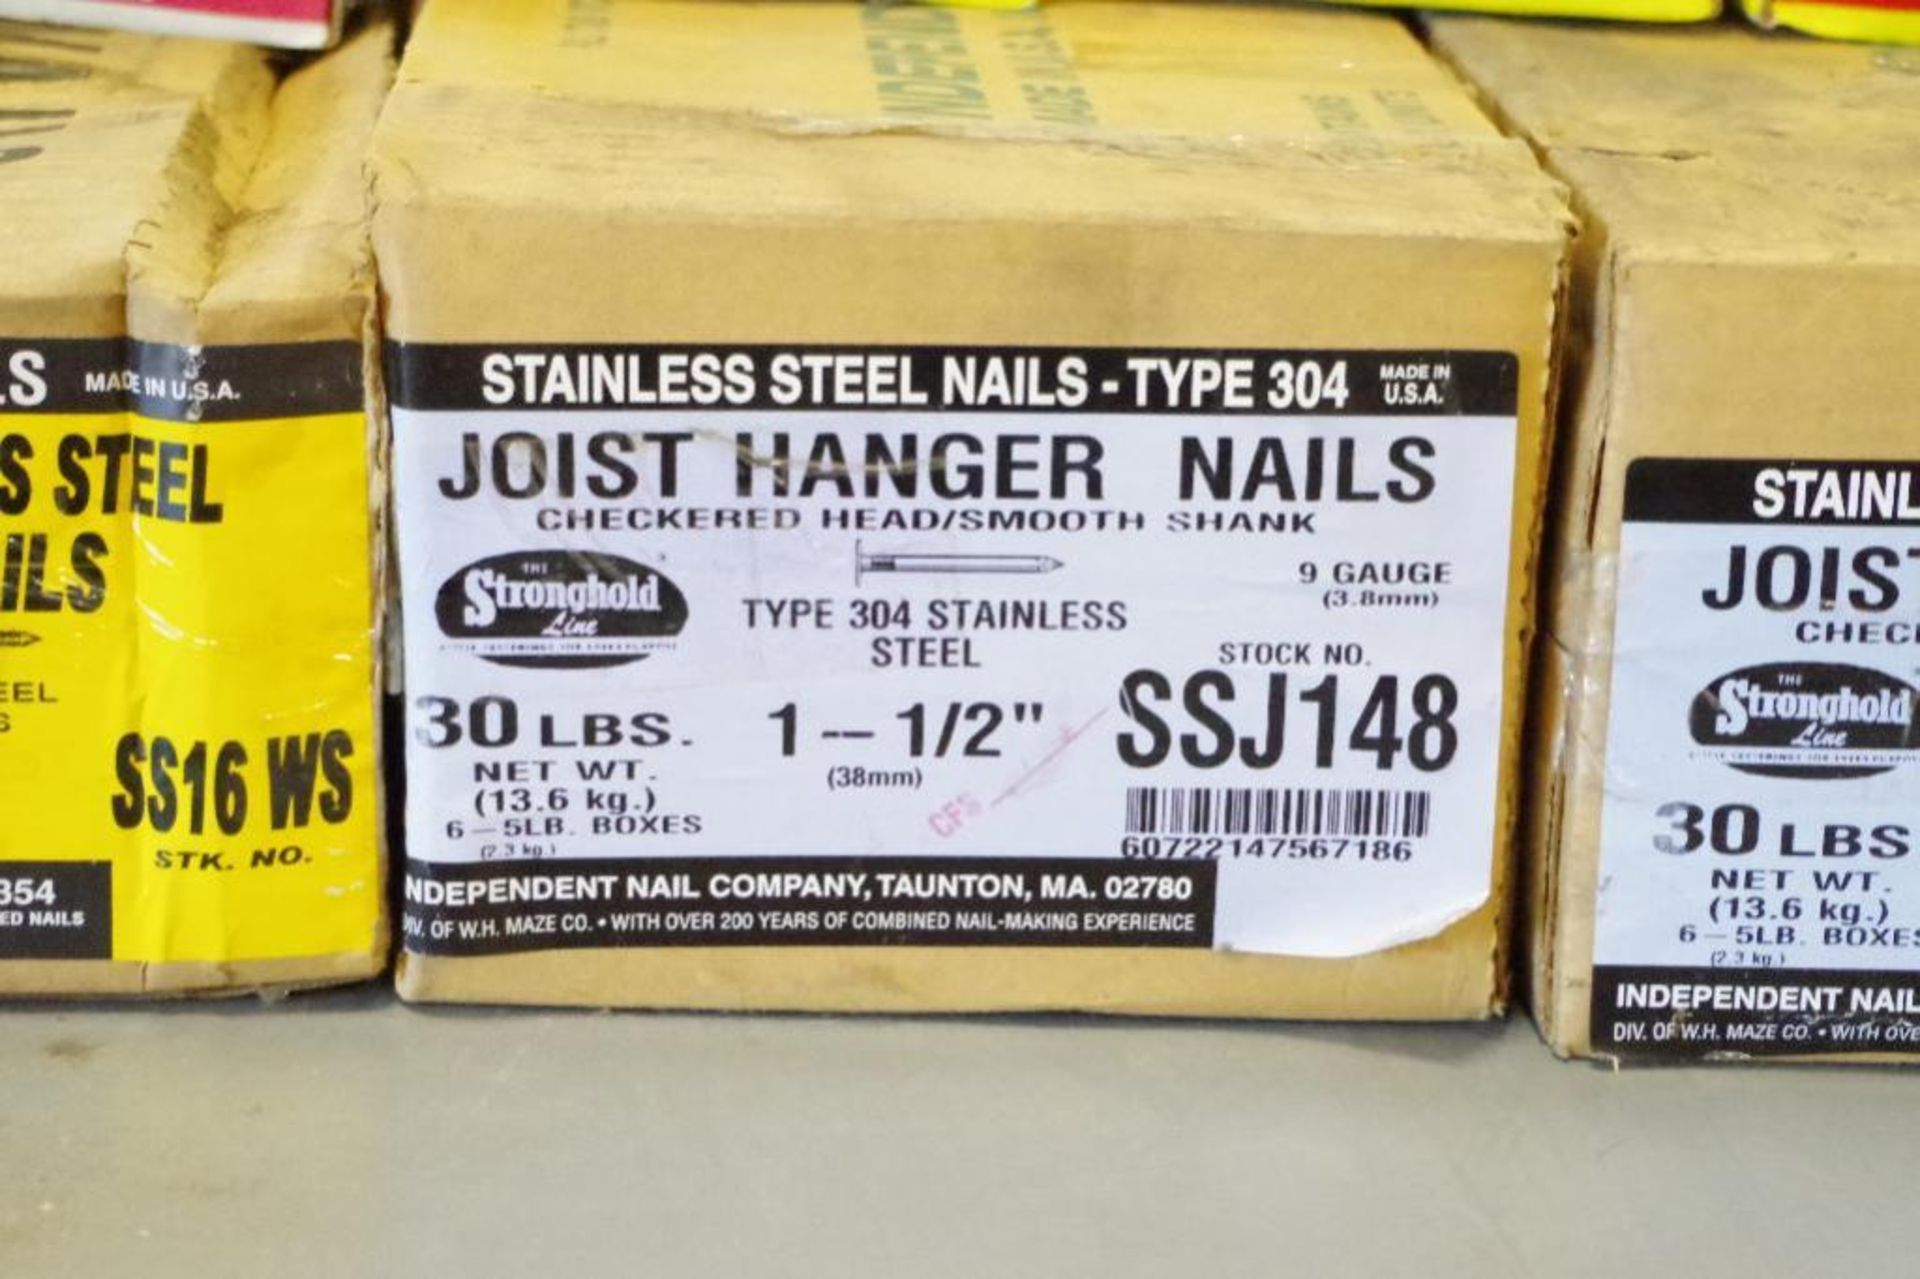 [125+] Lbs Asst. MAZE Nails: Stainless Steel Siding, Joist Hangers & More - Image 3 of 5